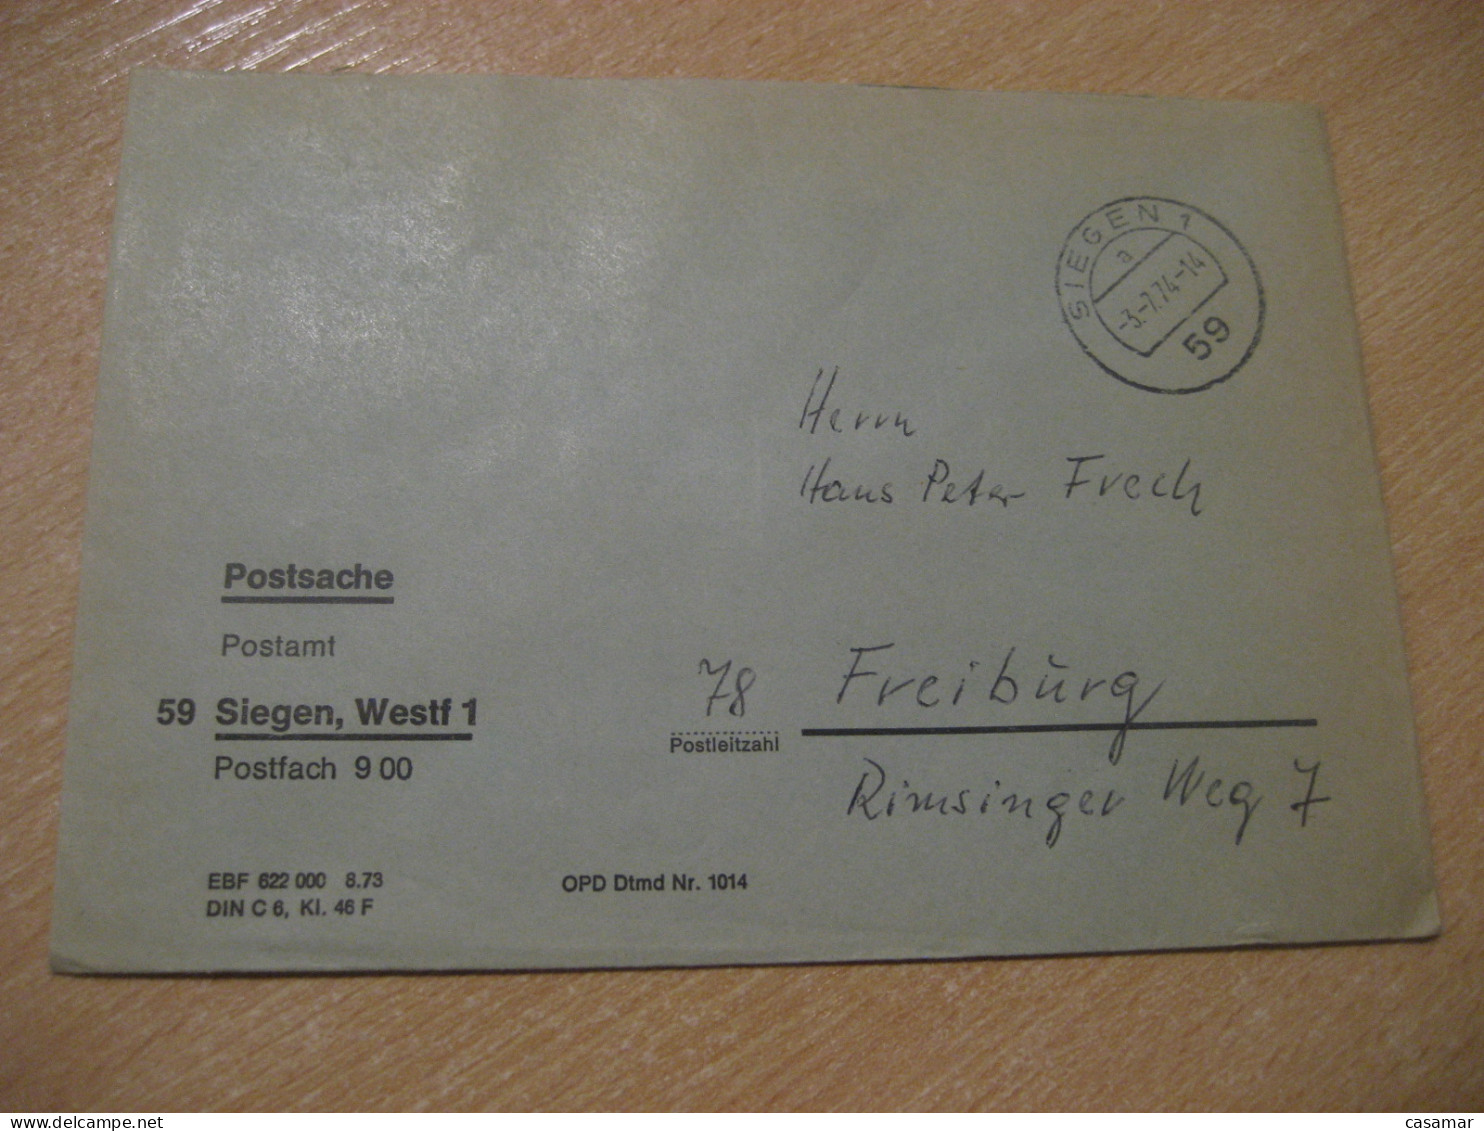 SIEGEN 1974 To Freiburg Postage Paid Cancel Cover GERMANY - Covers & Documents